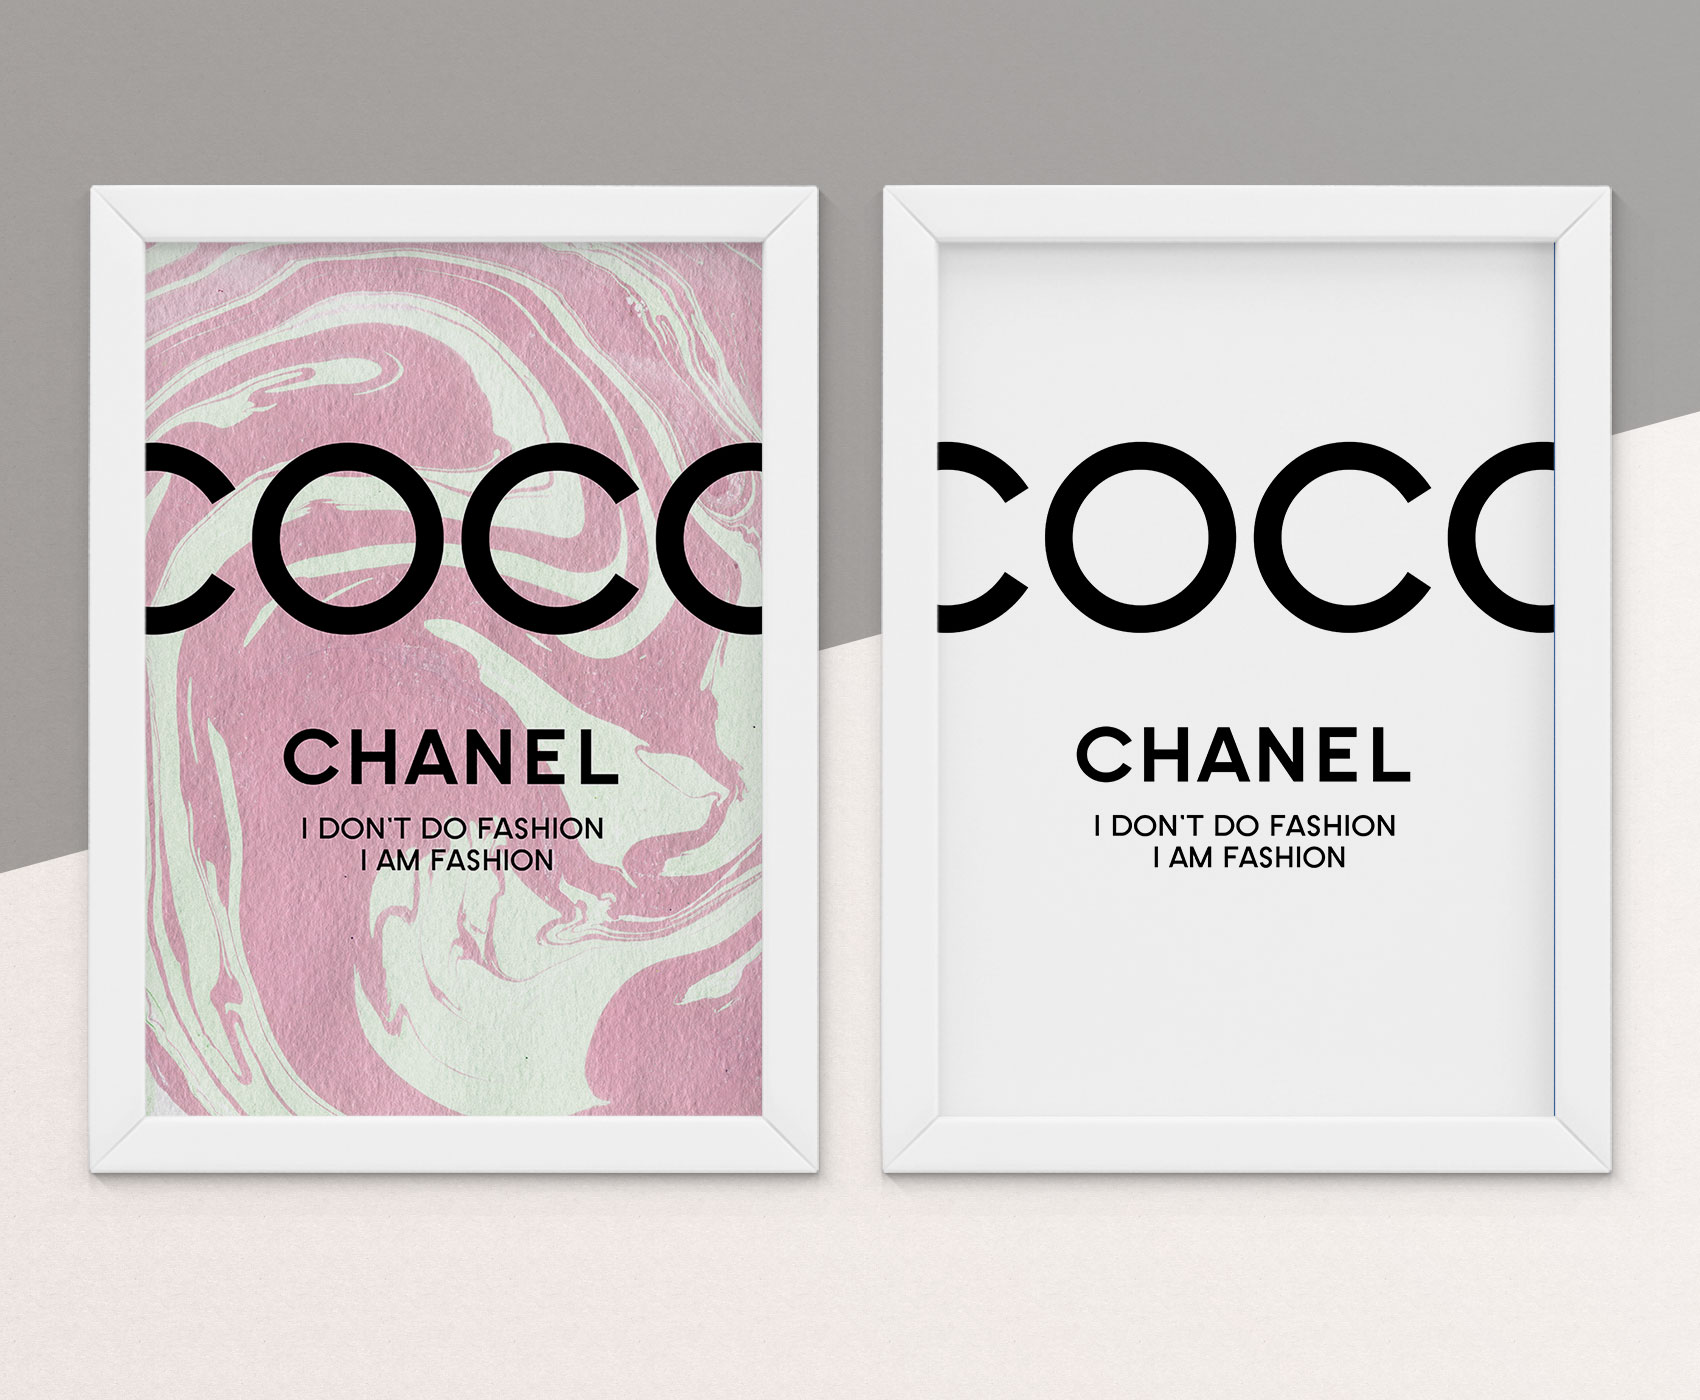 Coco Chanel Quote Free Printable Timetobe Free Printables Nursery Wedding And Motivation A stylish and cleanly designed poster with a quote by coco chanel keep your heels, head and match with some great photo art. coco chanel quote free printable